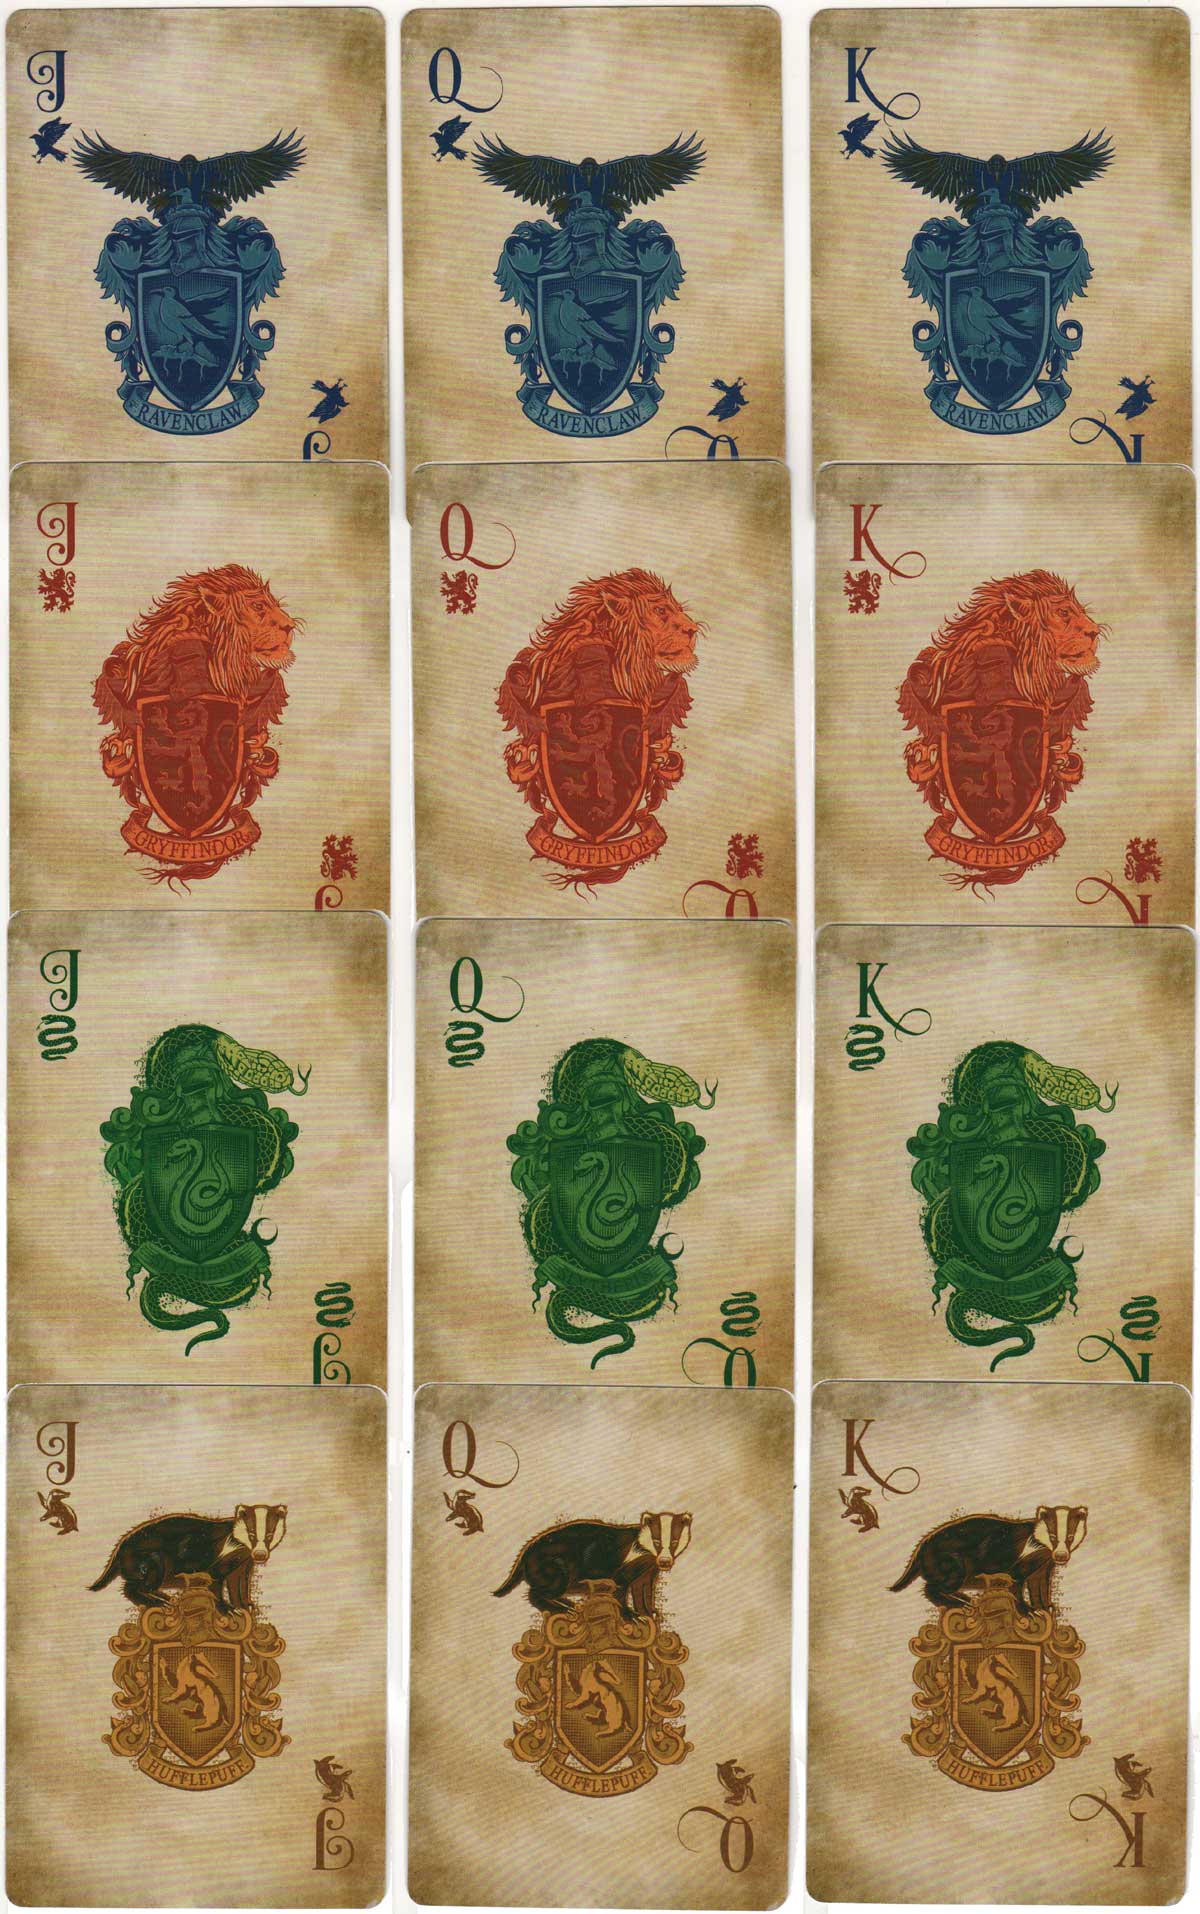 Harry Potter Hogwarts House Crests Set of 52 Playing Cards From Aquiarius for sale online